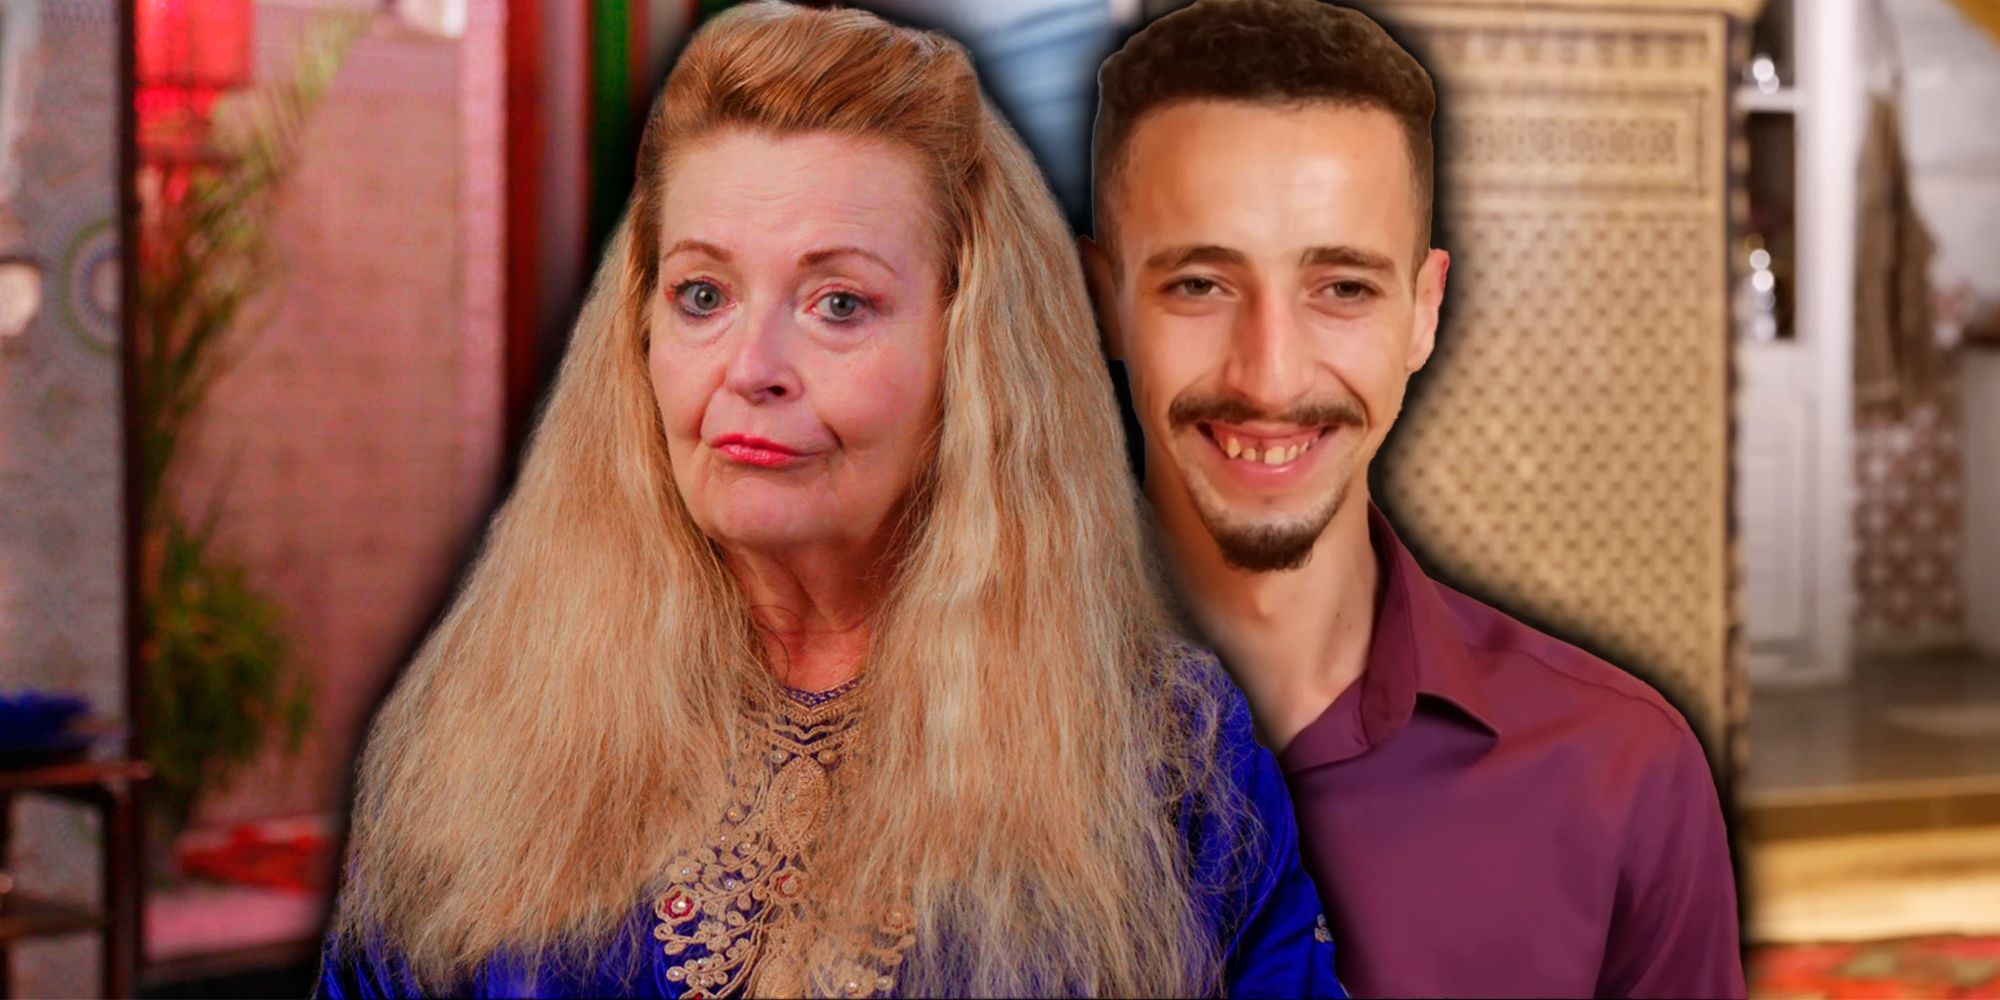 90 Day Fiance's Debbie looking serious and Oussama smiling